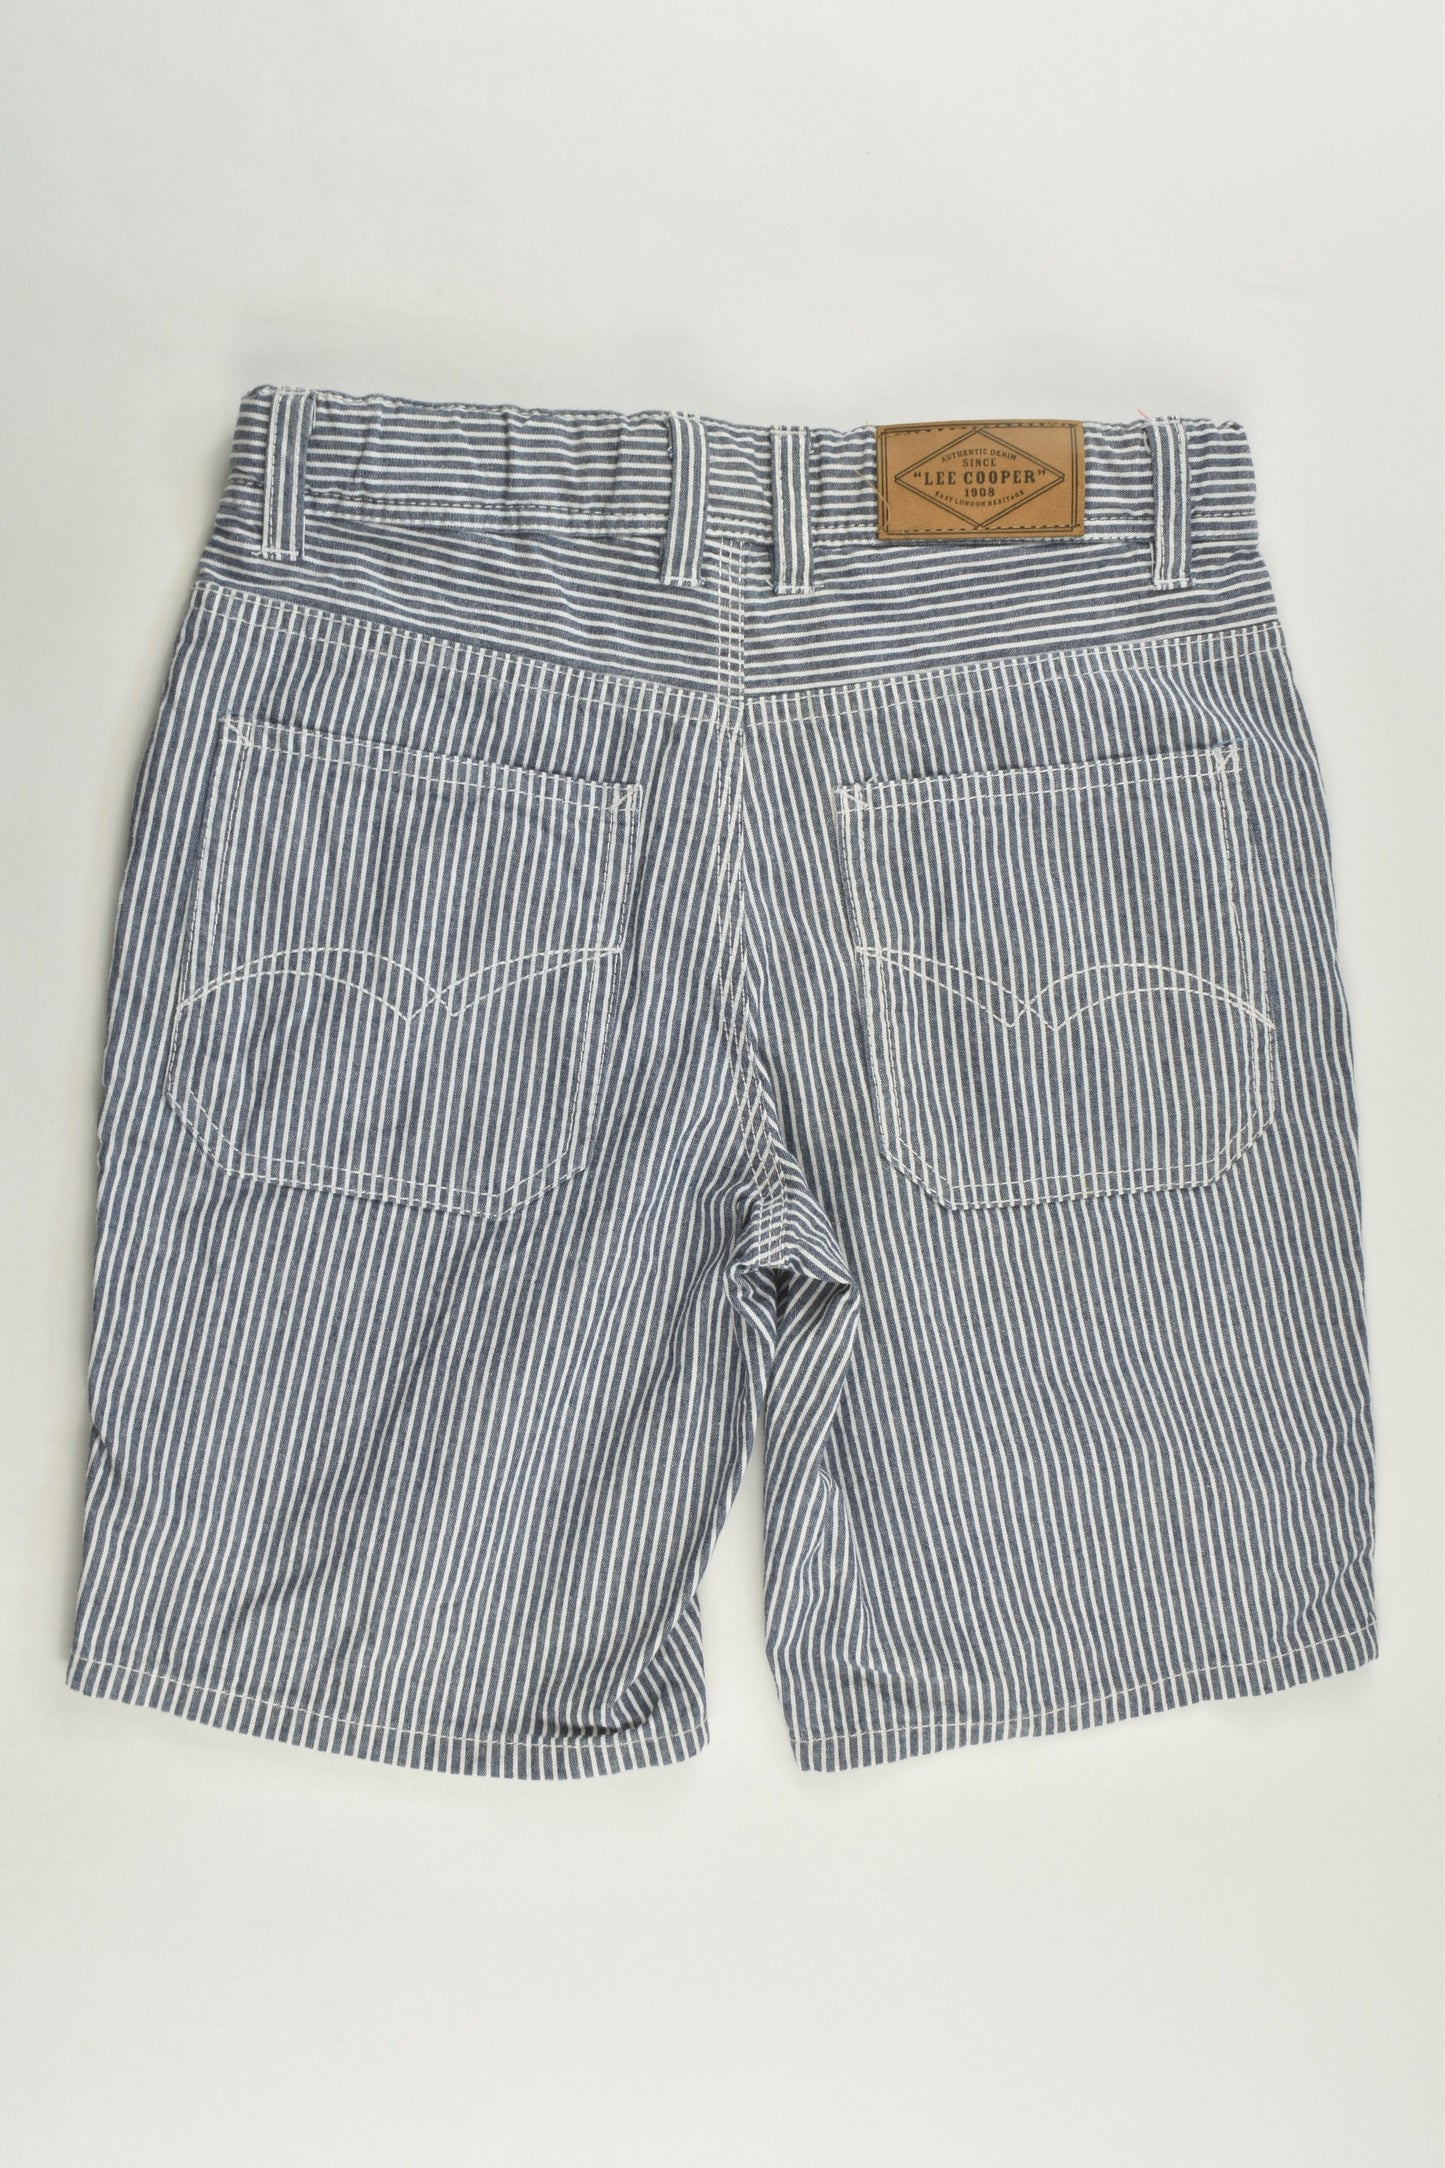 NEW Lee Cooper Size 8 Lightweight Striped Shorts